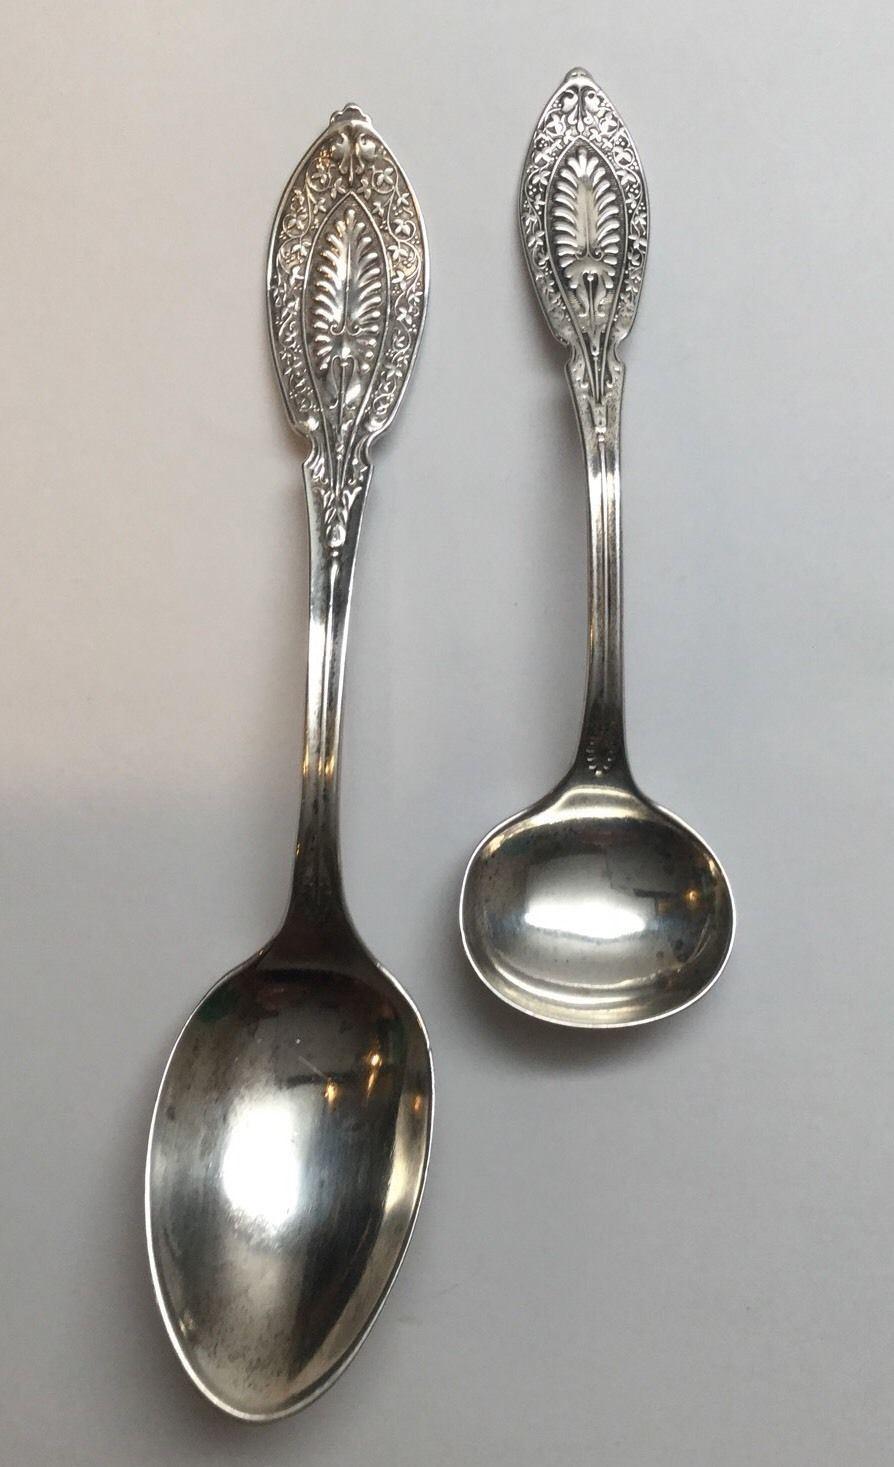 Antique Sterling silver John Polhamus 4 coffee spoons and a master salt spoon. 
Marked: JP PAT '74, STERLING. 
Monogrammed: Appears to be M or W. Coffee: 4 3/4